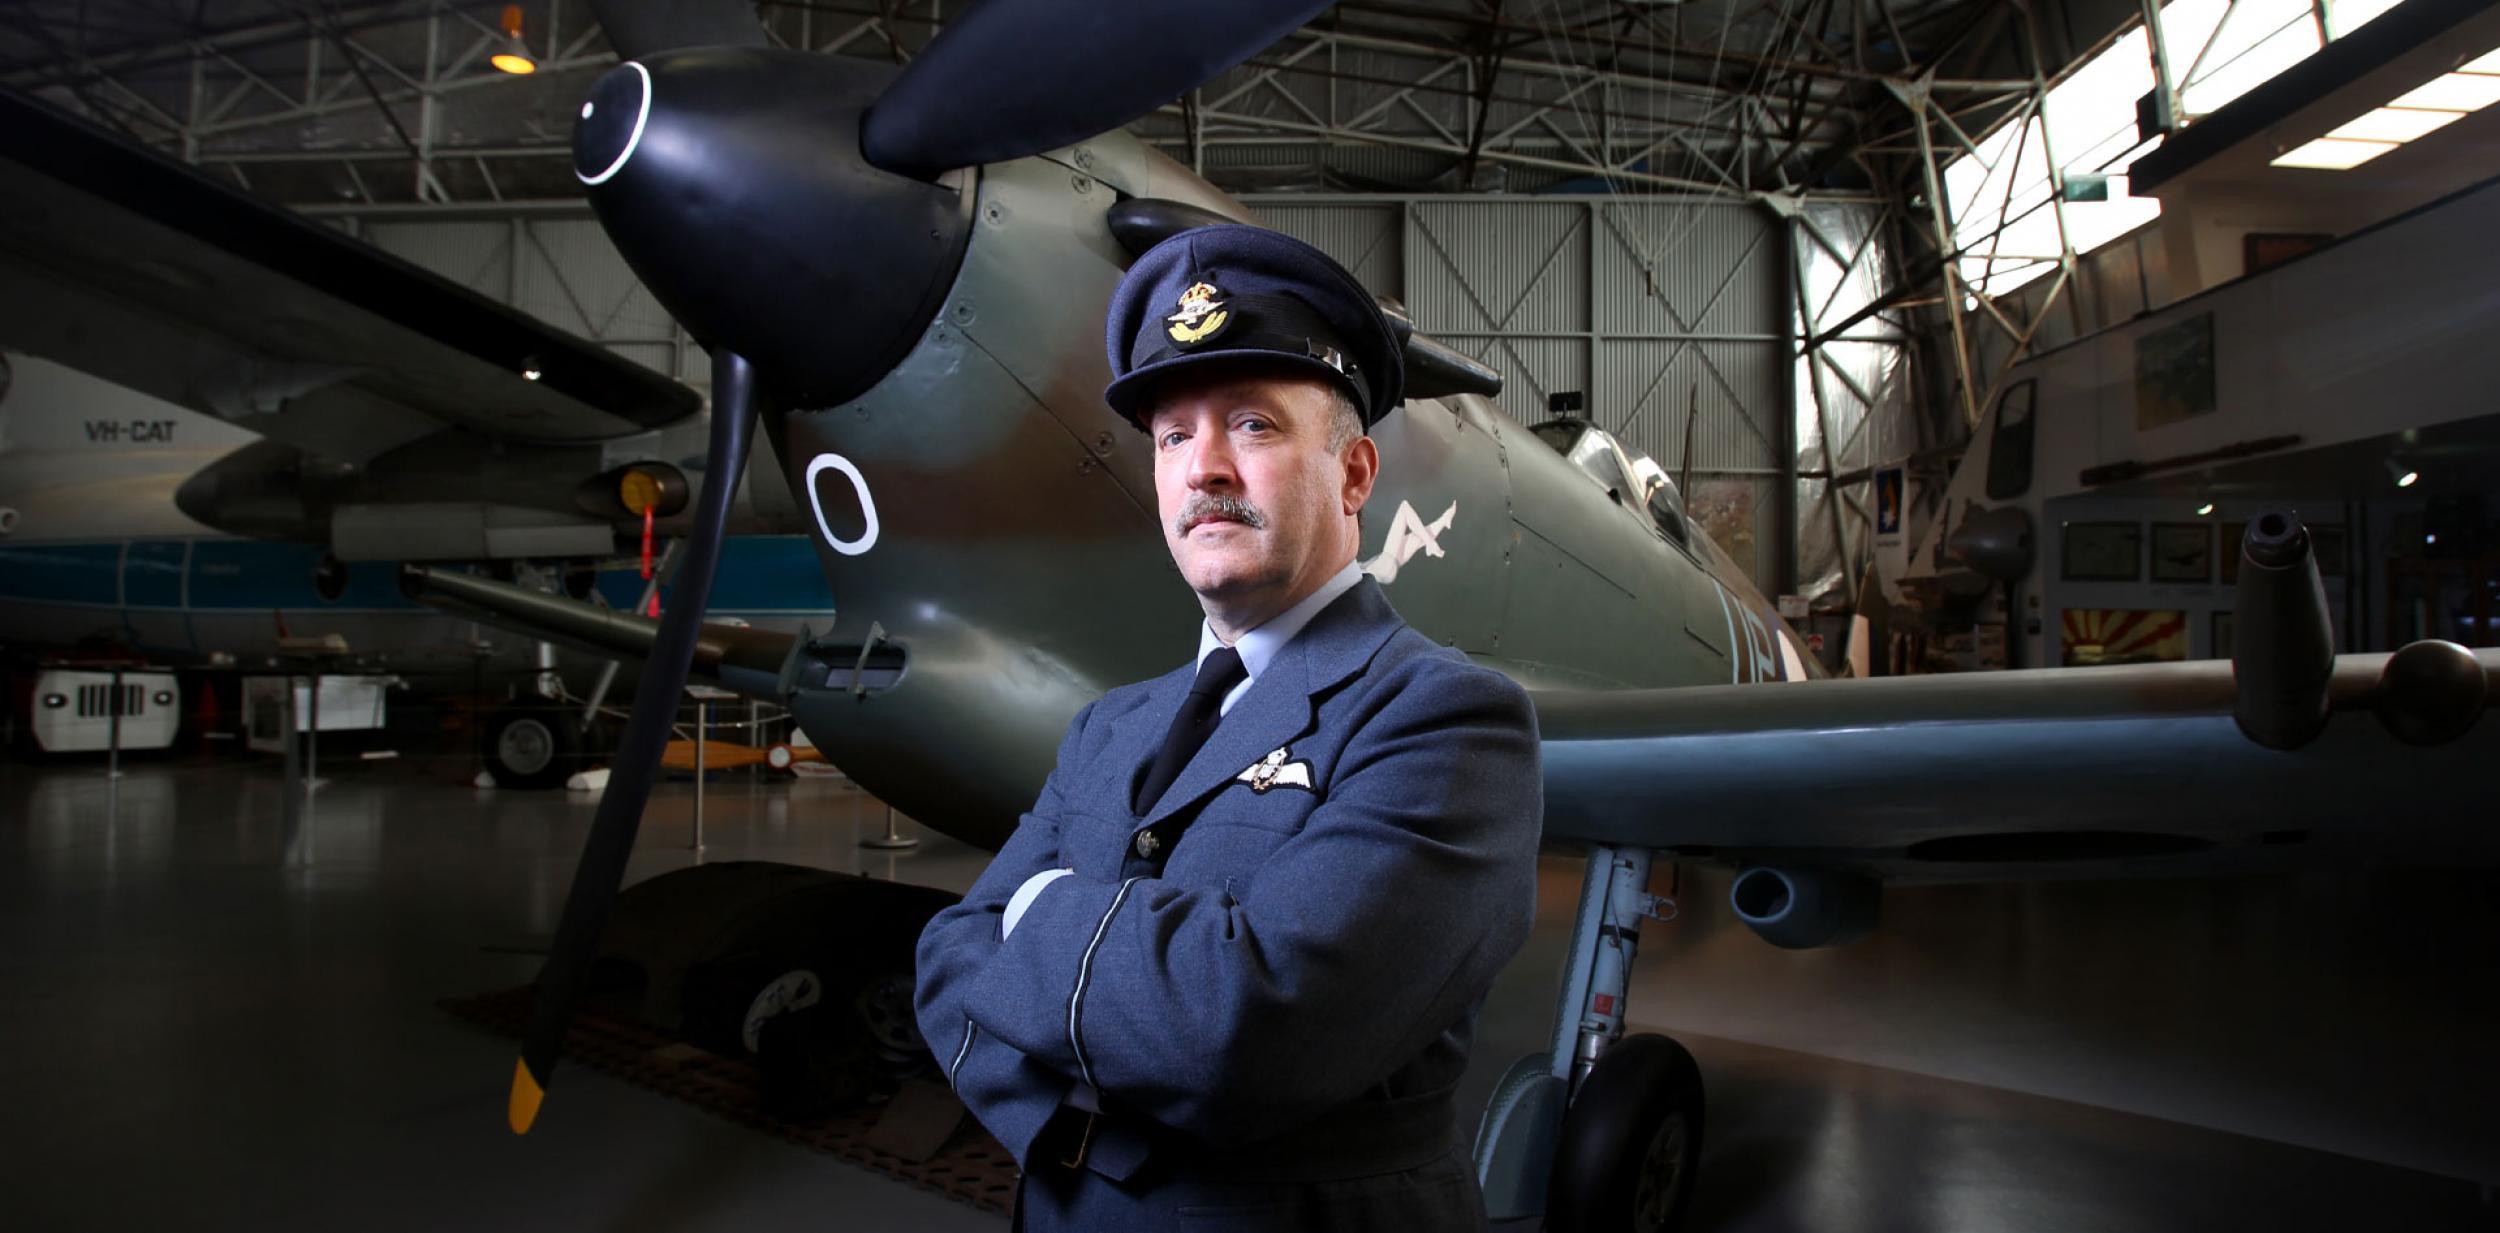 A pilot standing in front of a spitfire plane.